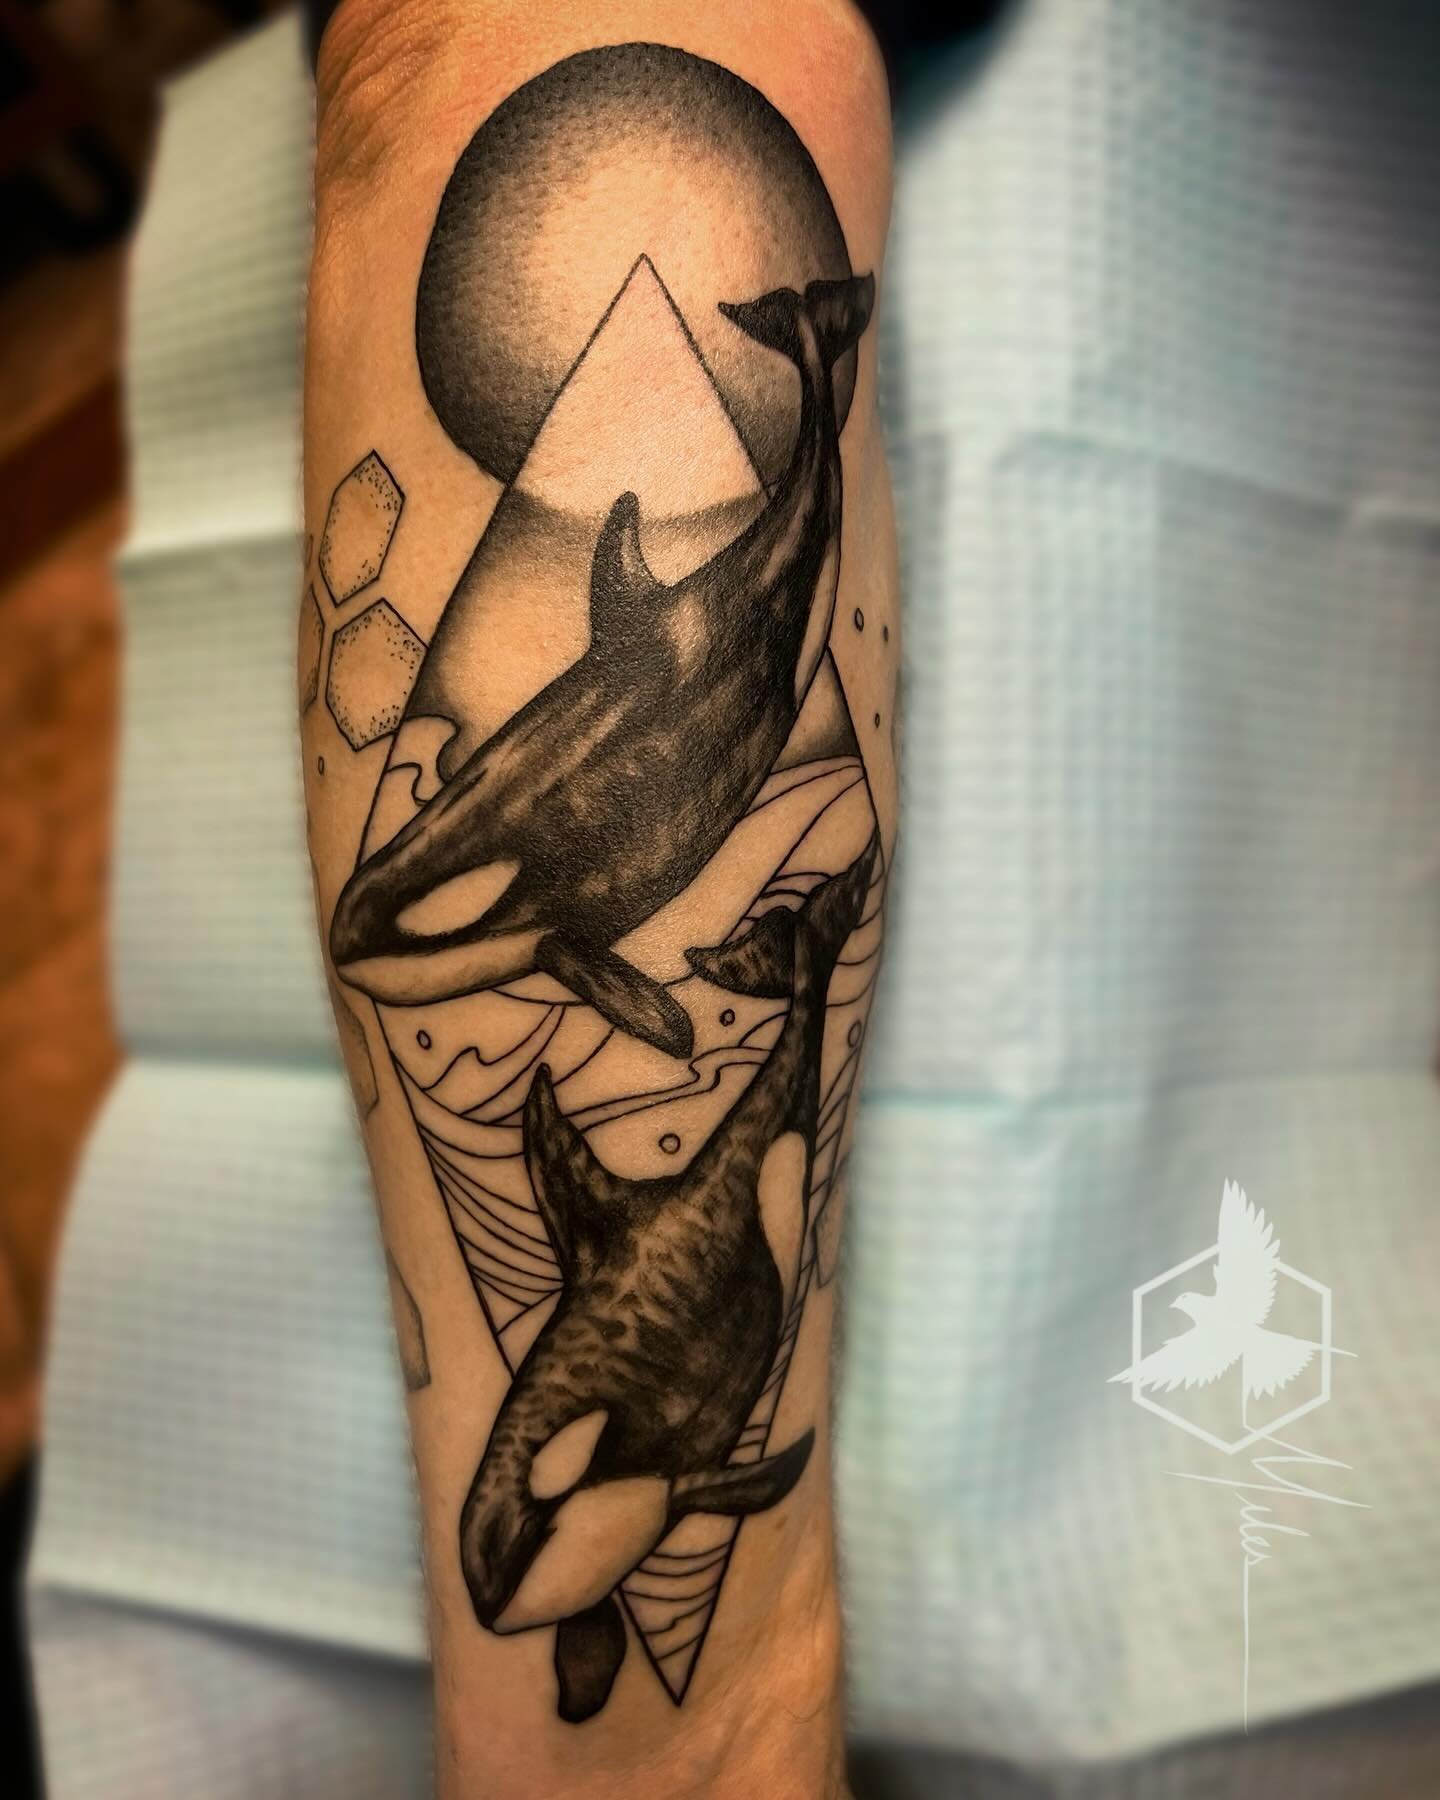 Orcas on the forearm. Thank you Michael!